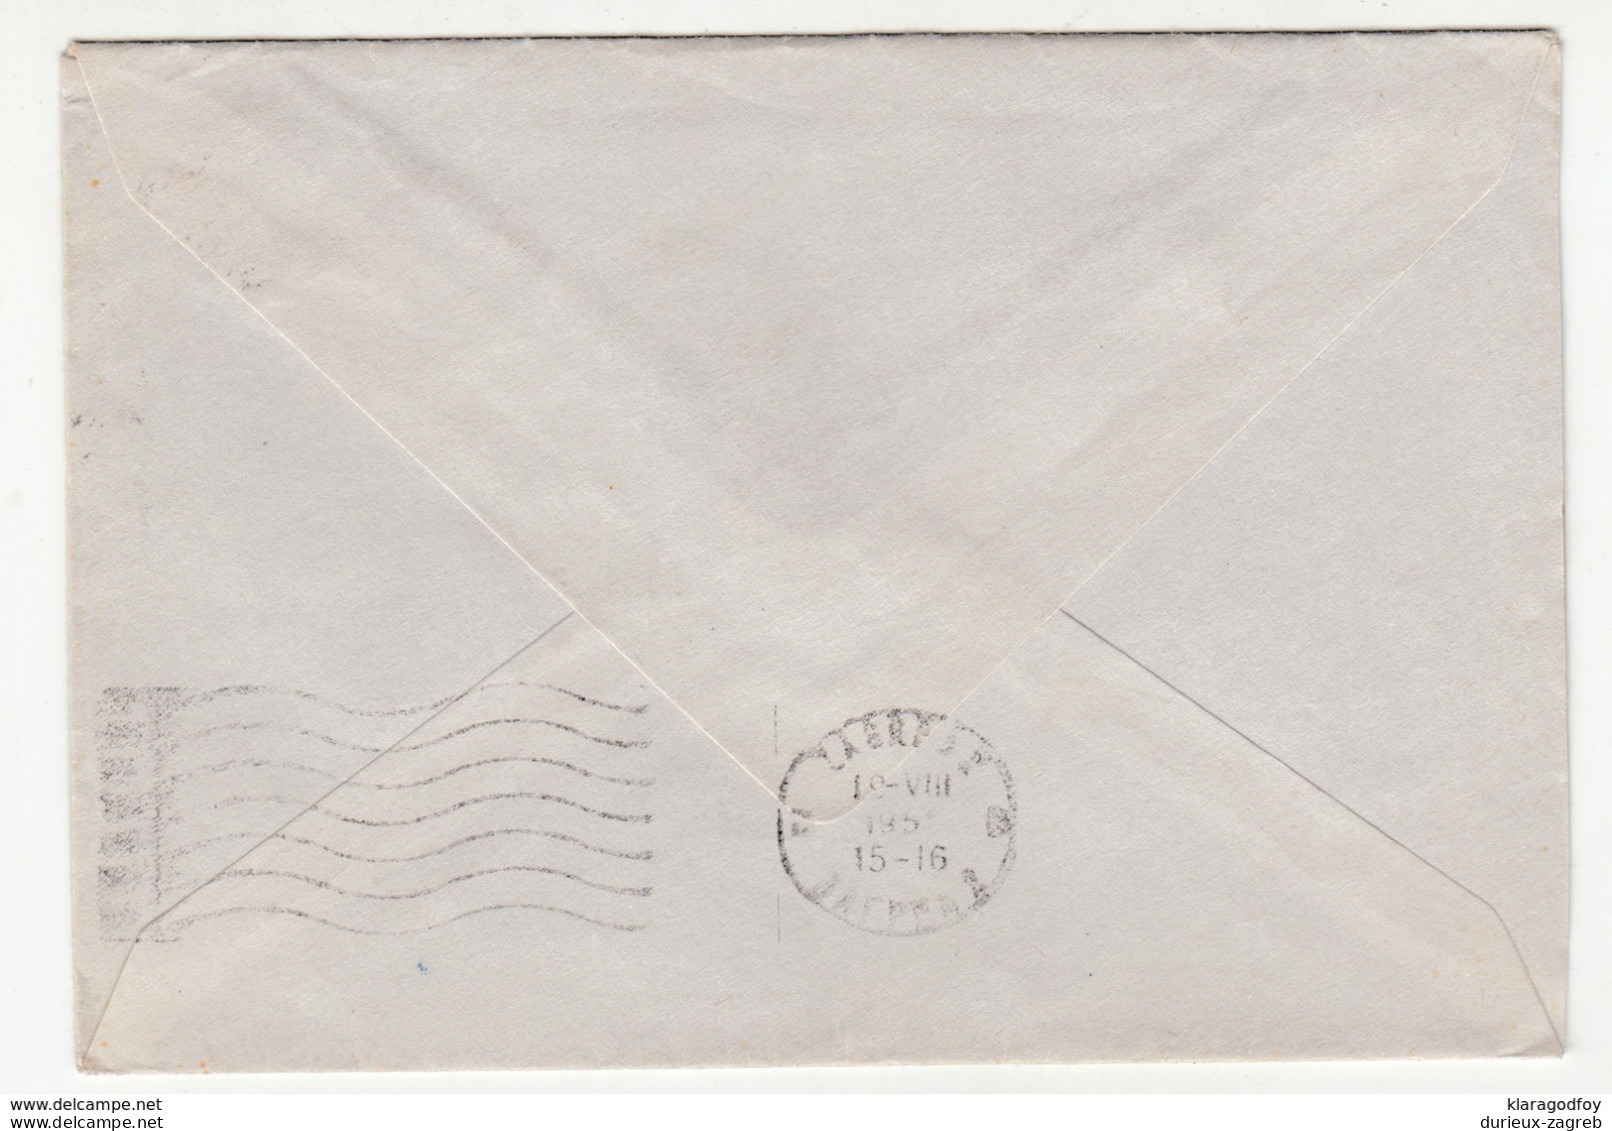 Yugoslavia Letter Cover Posted 1955 Dubrovnik To Zagreb B200301 - Lettres & Documents